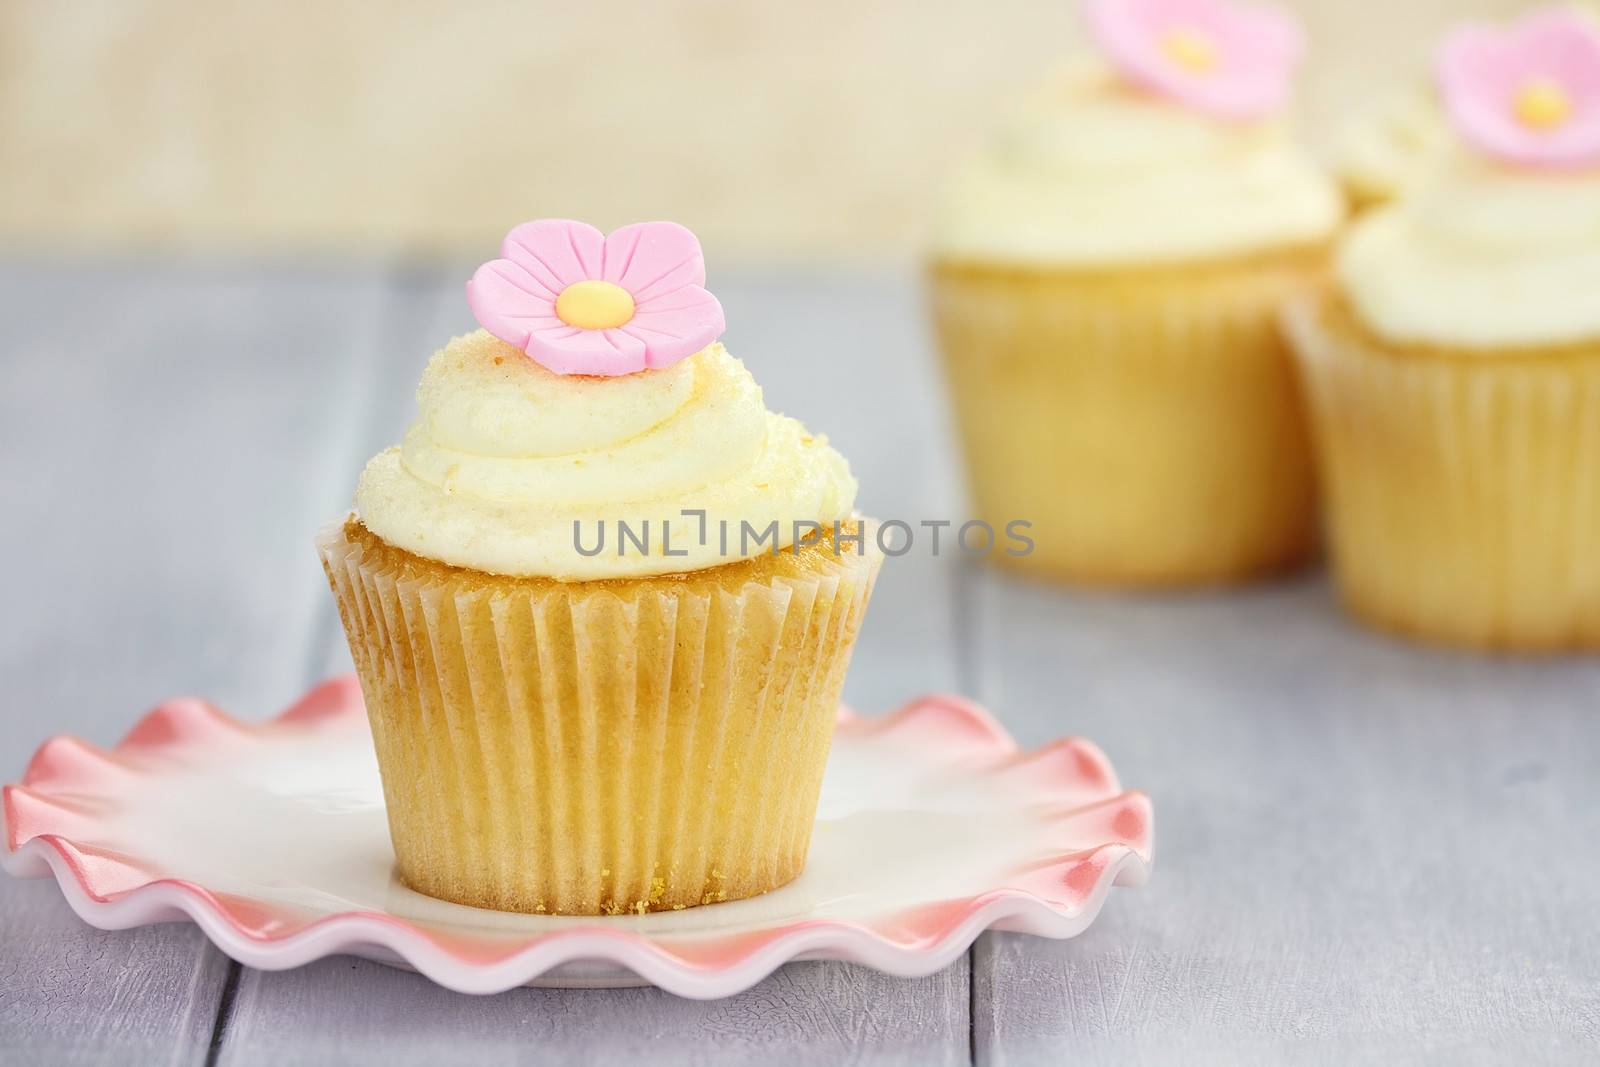 Pretty yellow and pink cupcakes with extreme shallow depth of field with antique dishes.